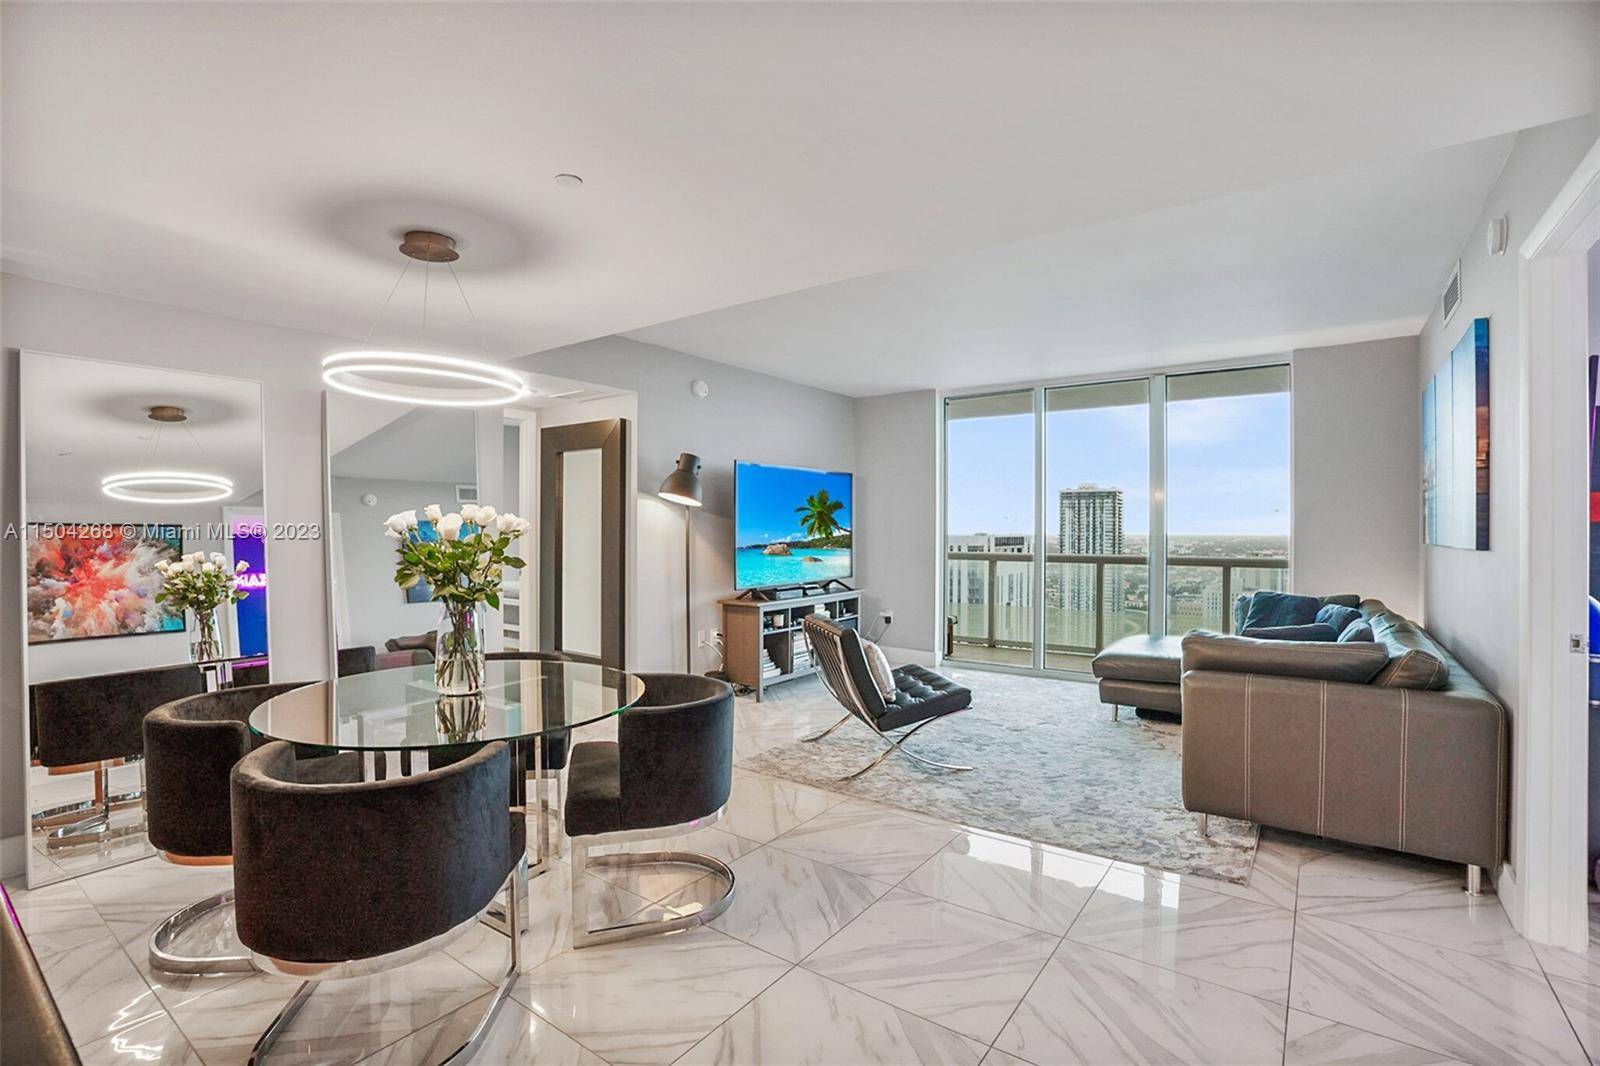 This 46th FL corner unit at 50 Biscayne features 2 Beds, 2 Baths w a large wraparound balcony facing South West.